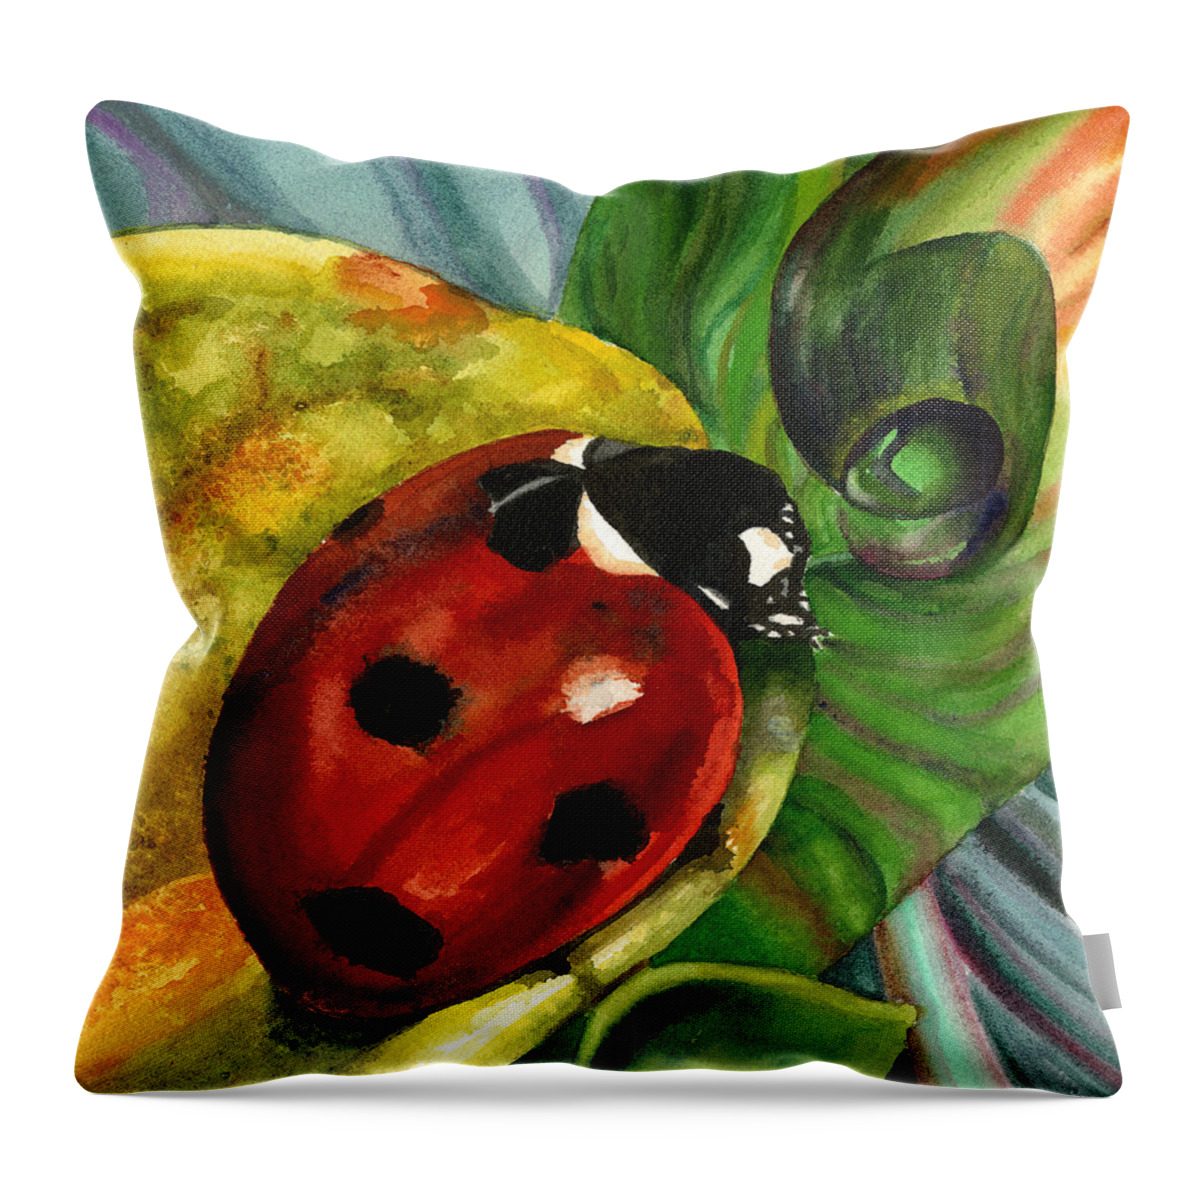 Ladybug Painting Throw Pillow featuring the painting Ladybug by Anne Gifford